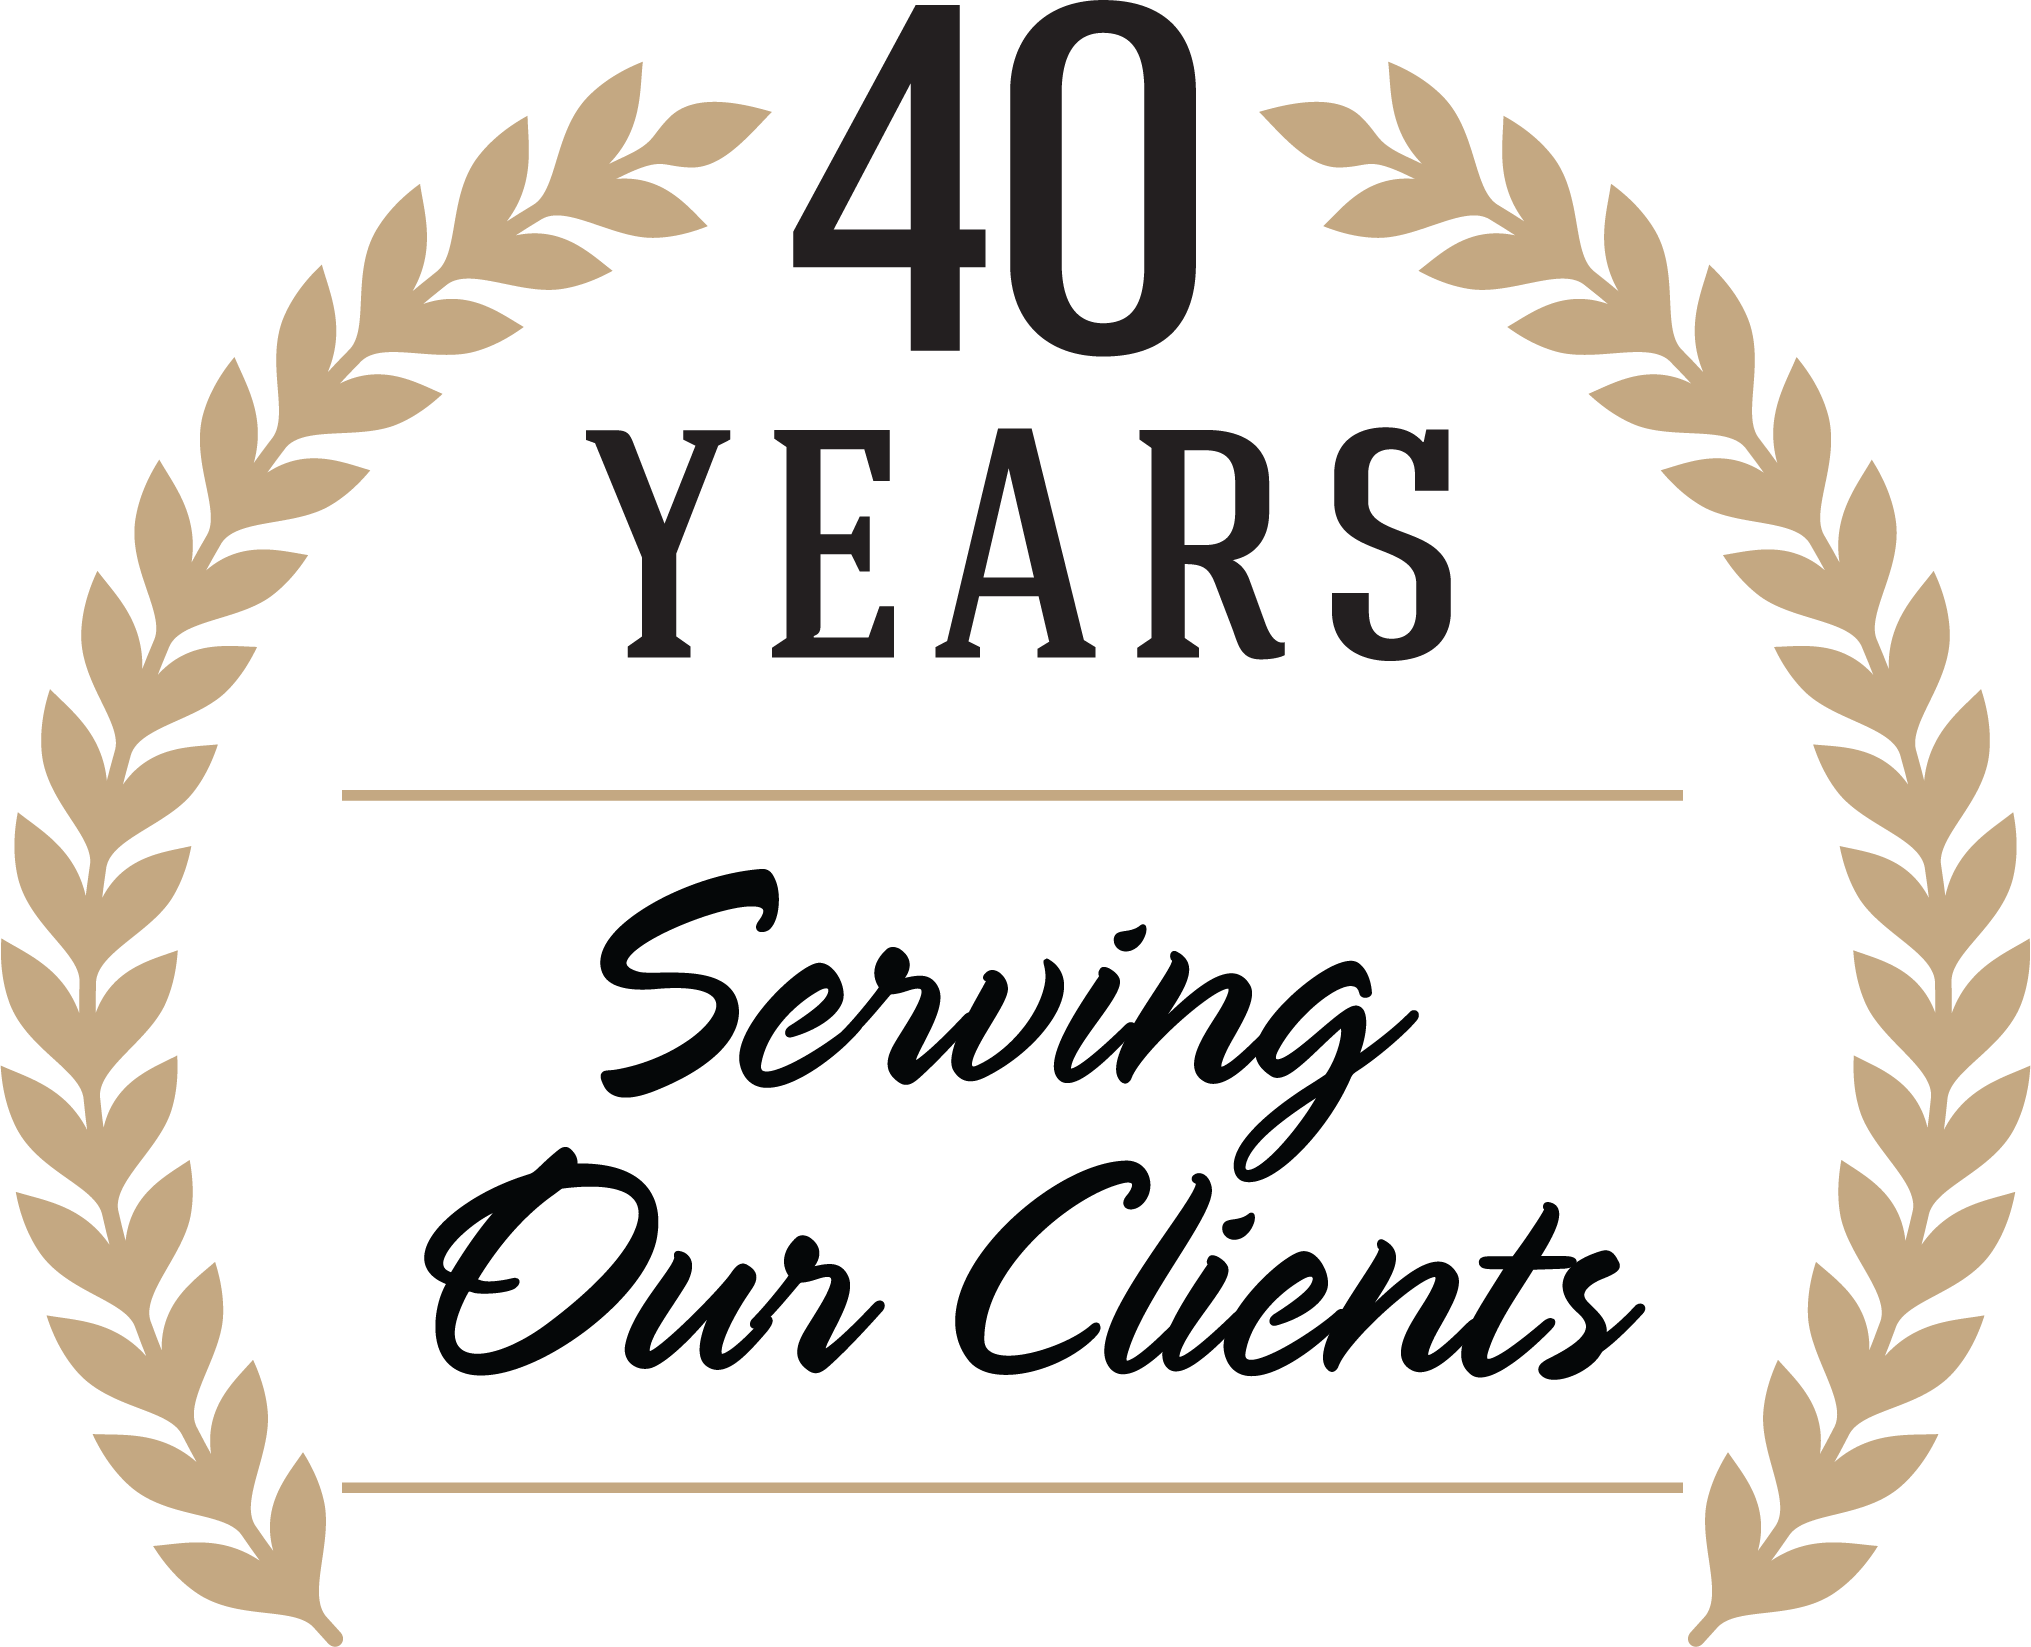 Over 40 Years of Service